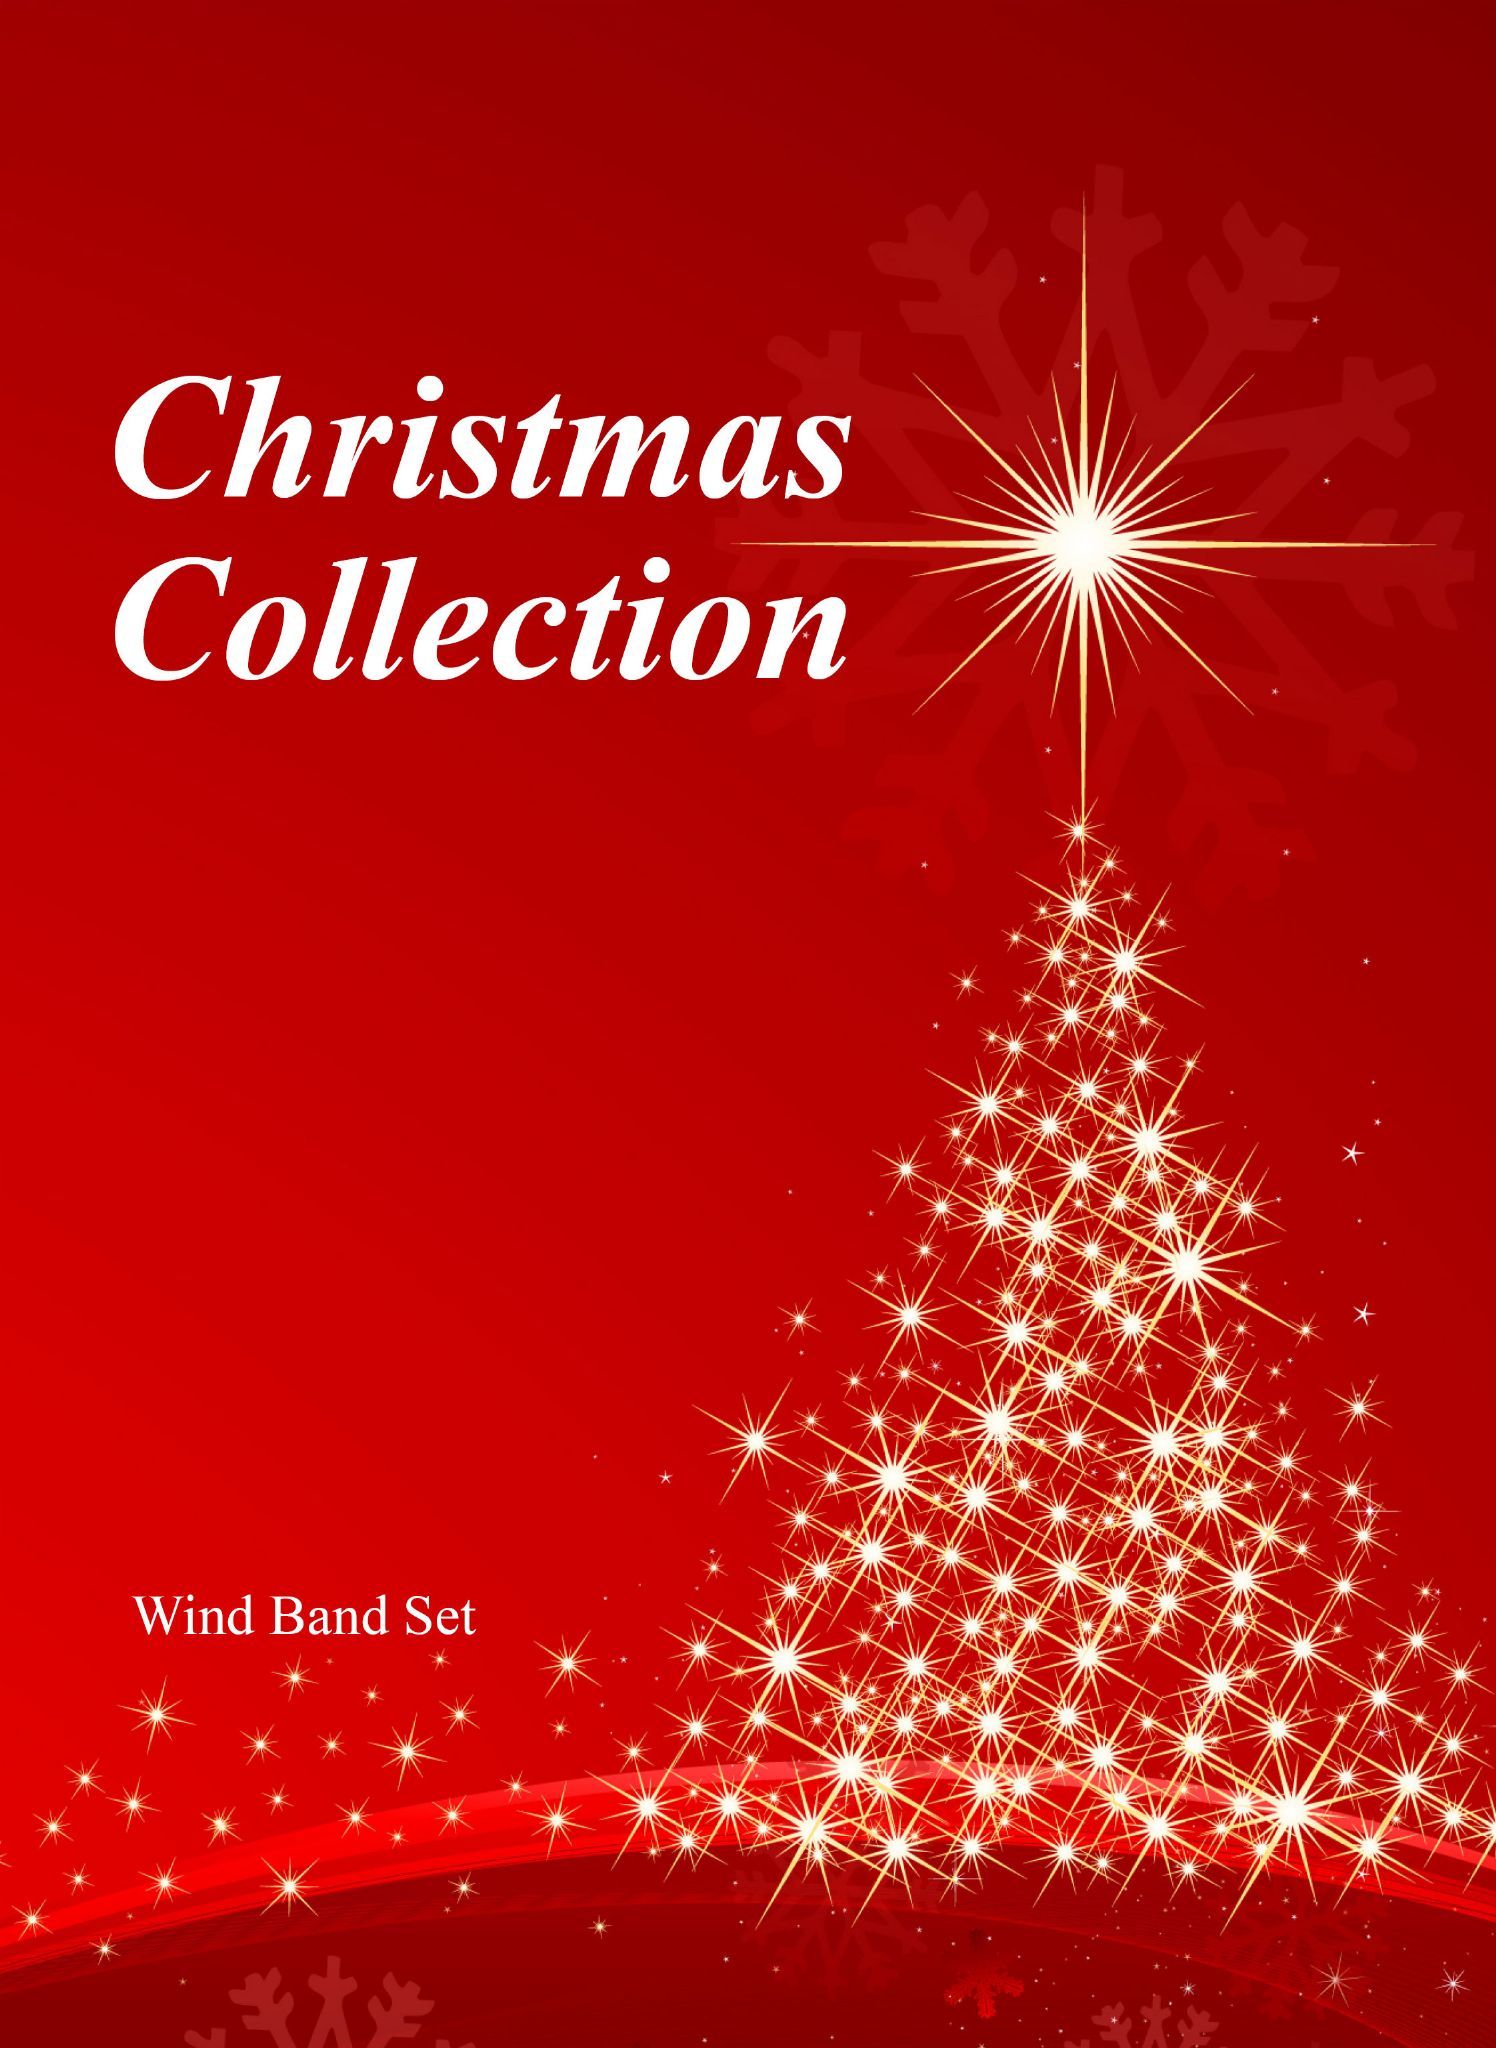 Christmas Collection - Wind Band Set - March Card Size